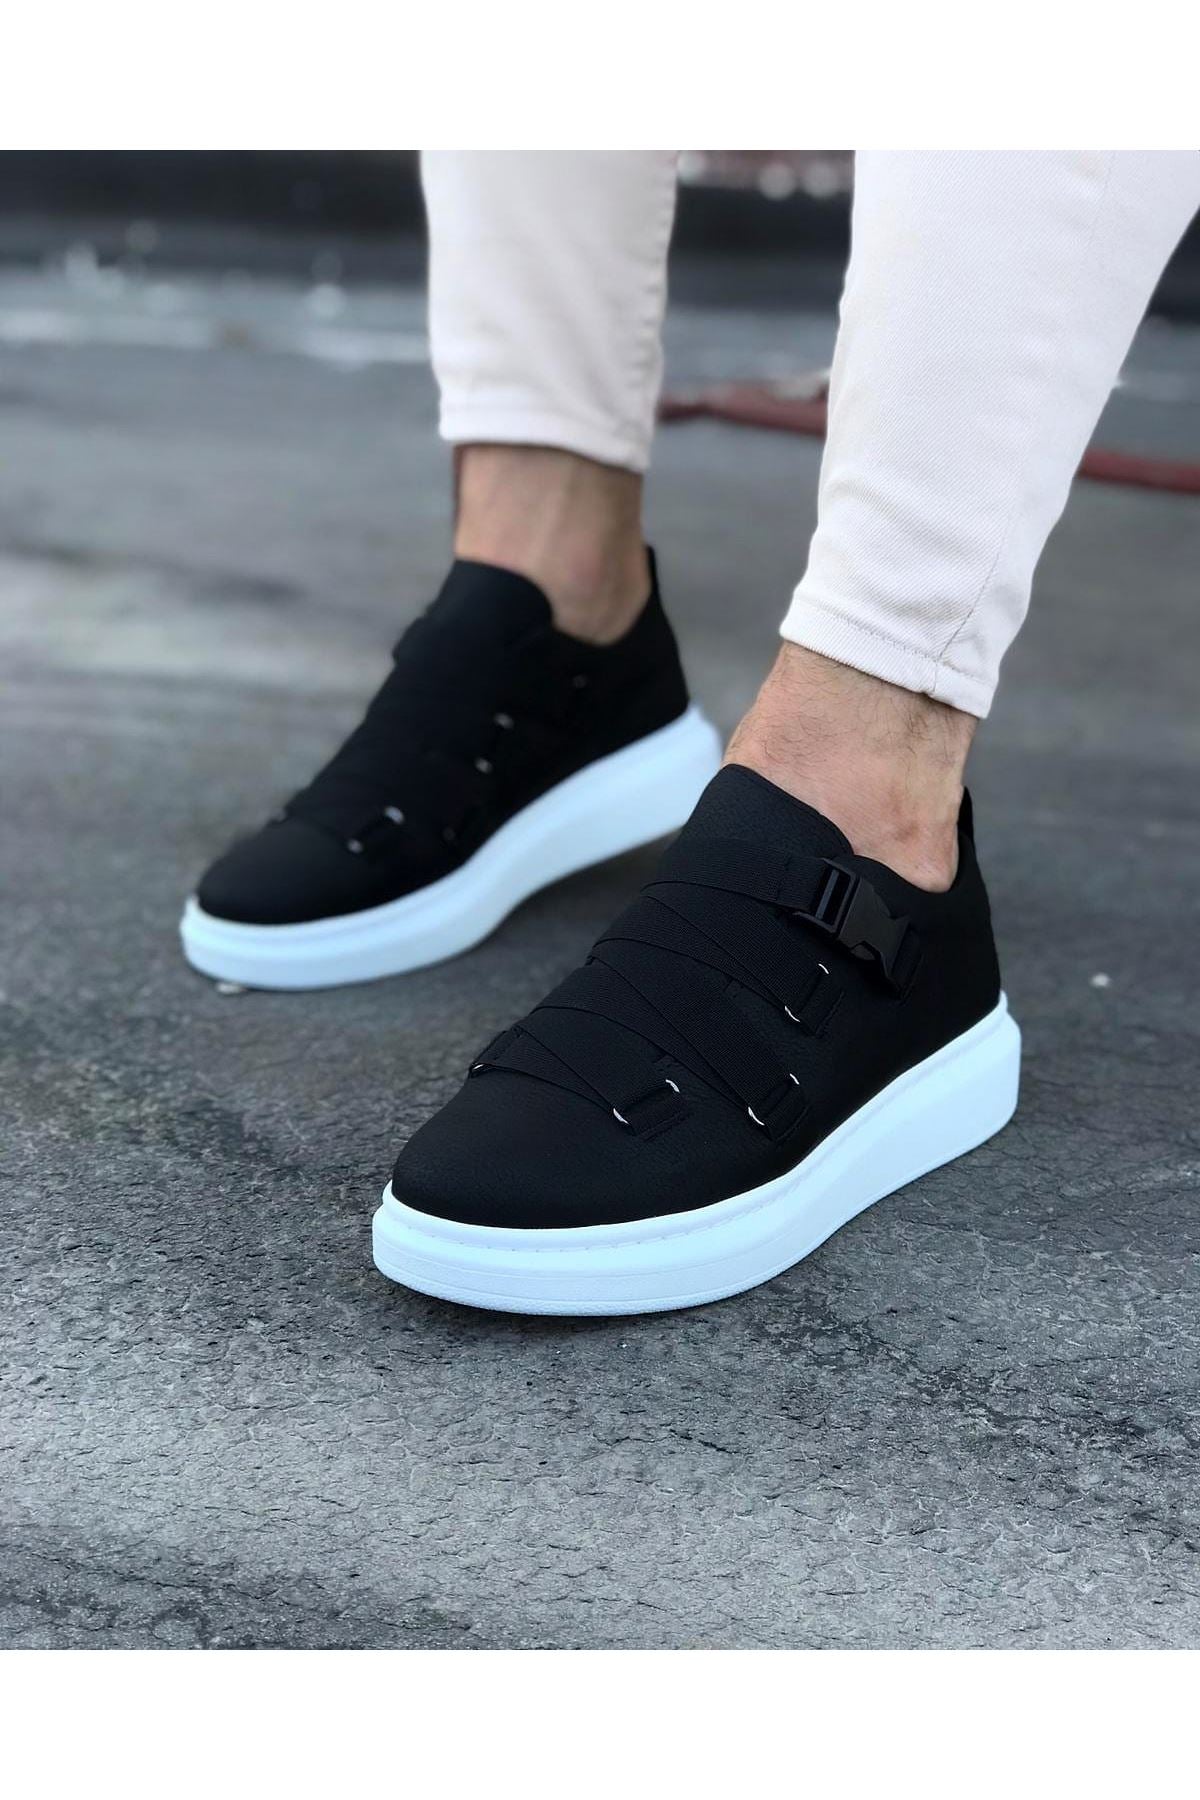 WG033  Black Men's High-Sole Shoes sneakers - STREETMODE™